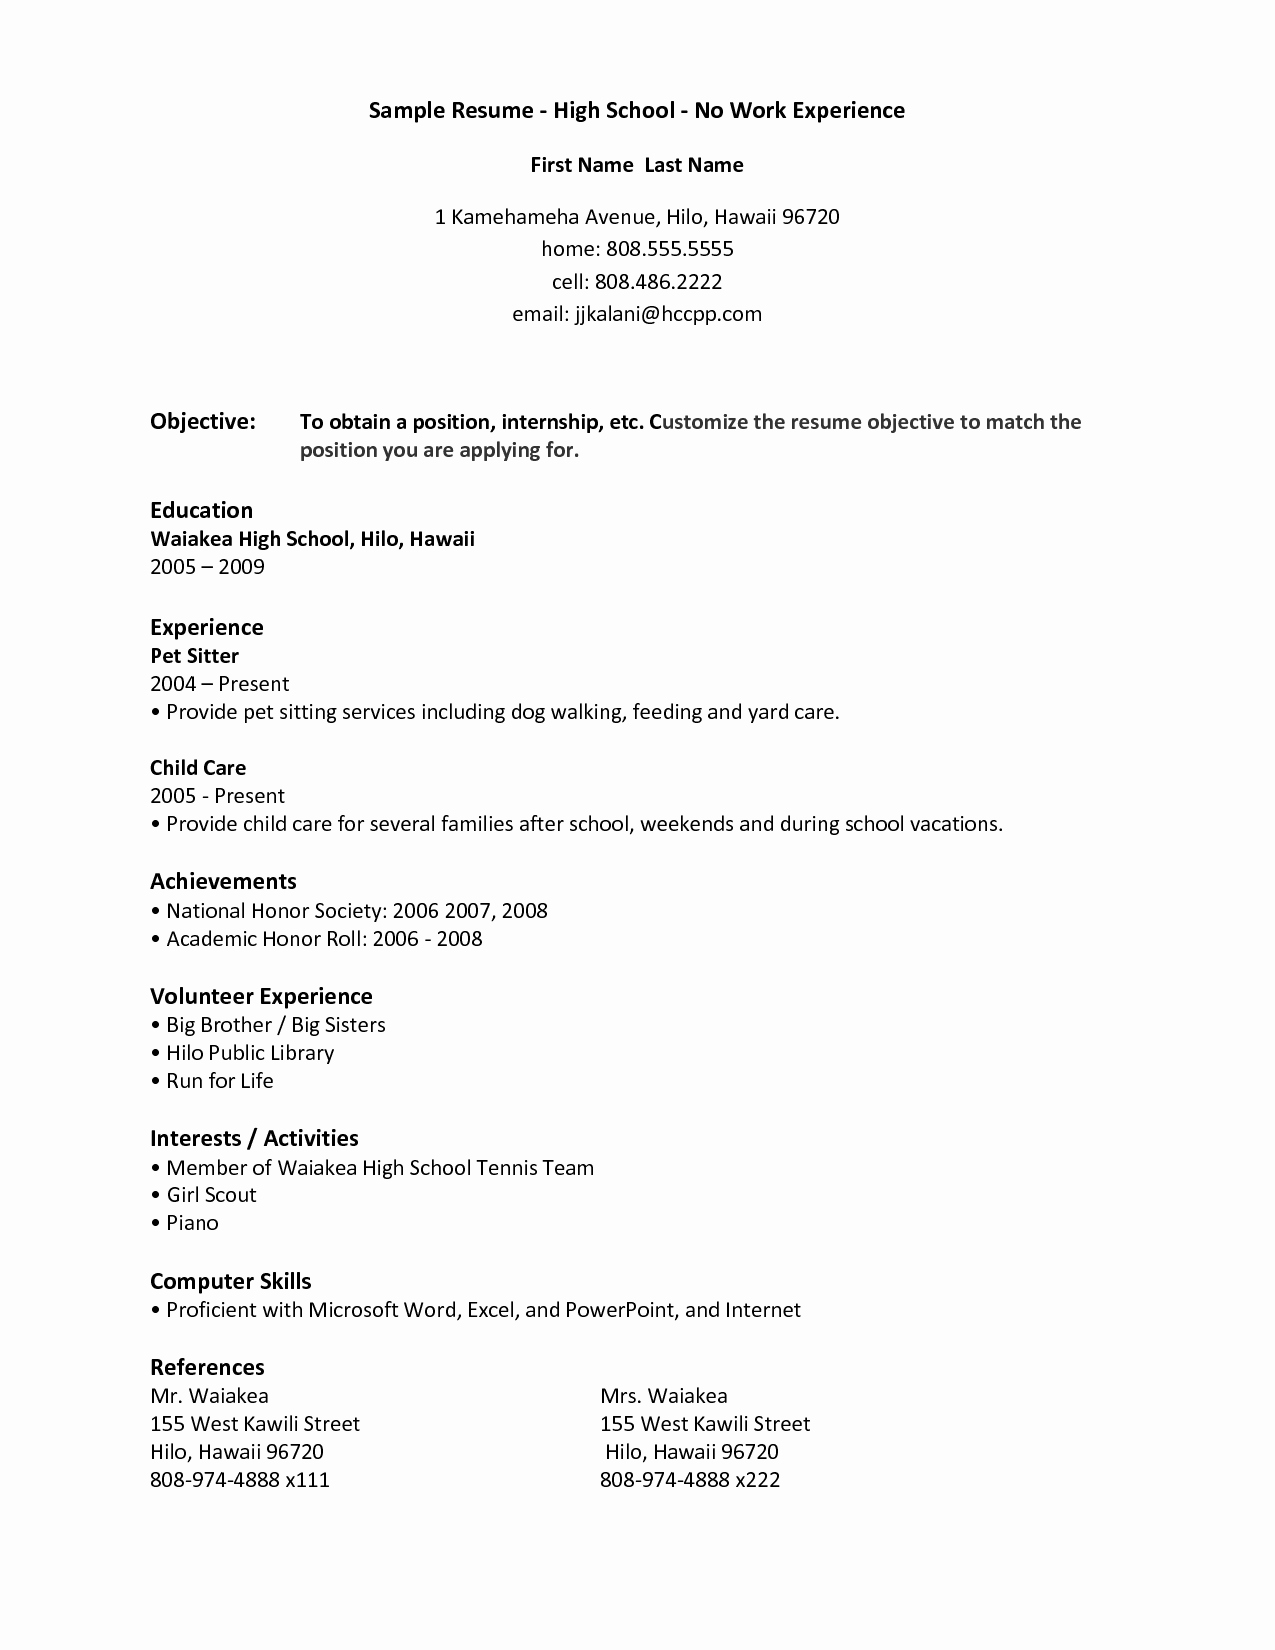 Resume Examples for Highschool Students Best Of High School Student Resume Example Resume Template Builder